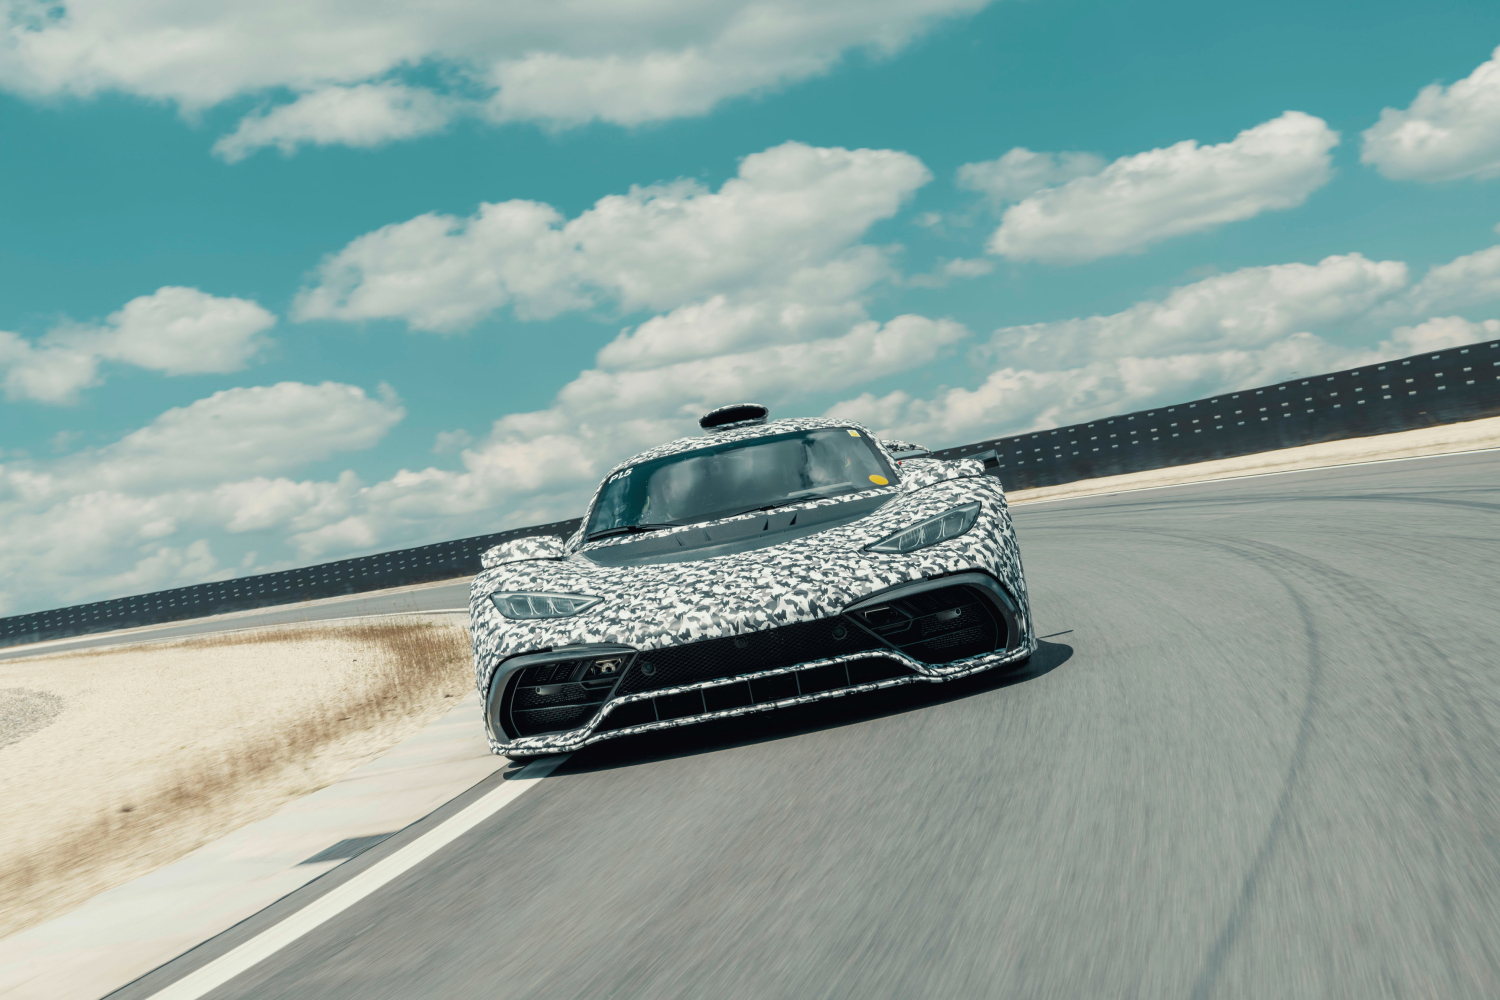 The Mercedes-Benz AMG One